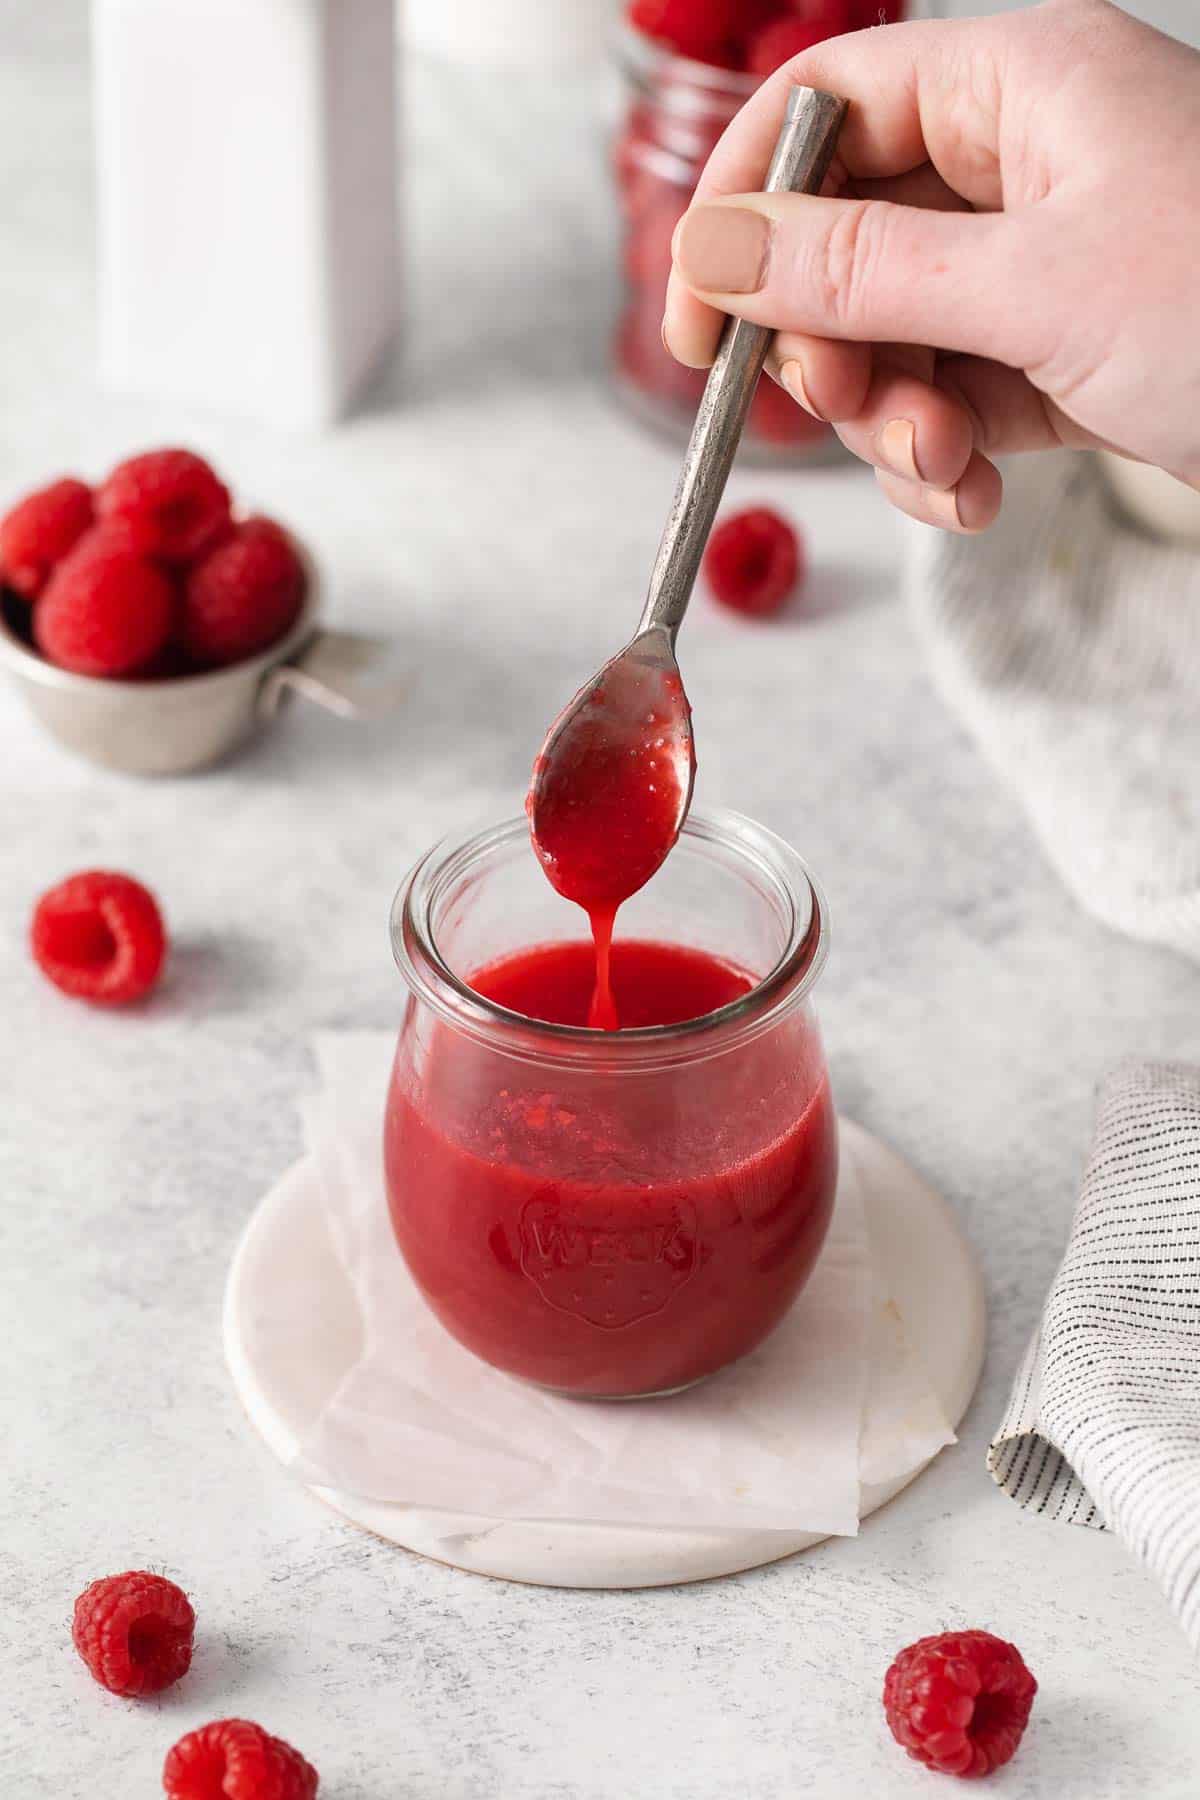 A hand holding a spoon and dipping it into a jar of raspberry coulis